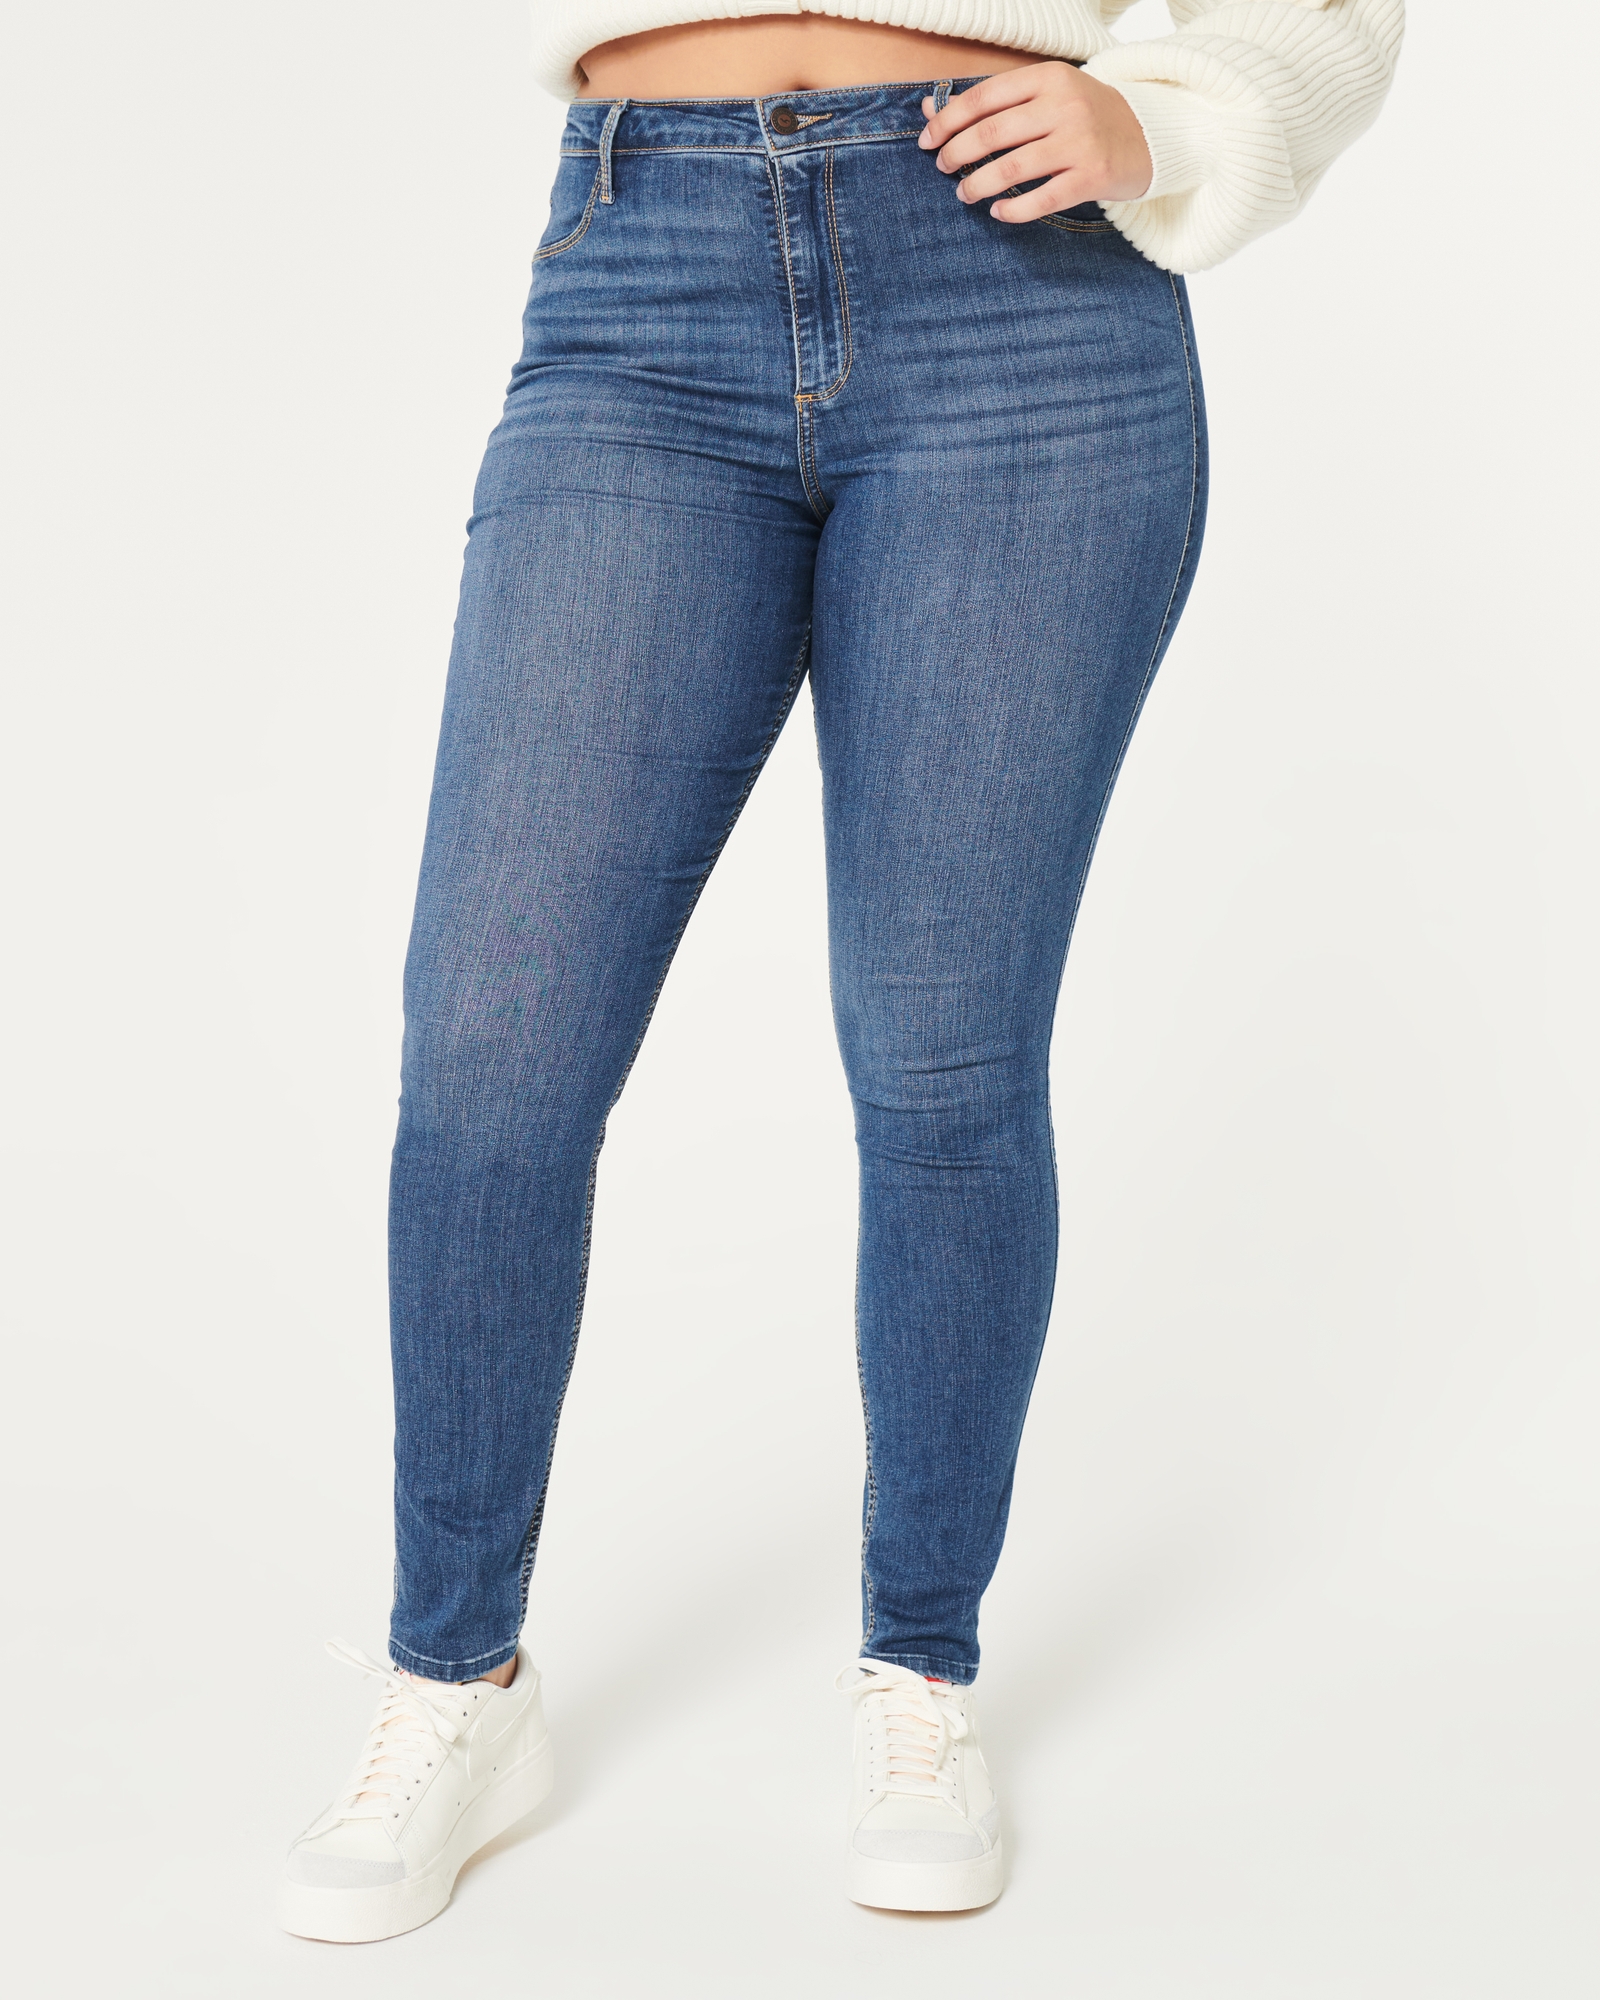 Hollister Jeggings review 